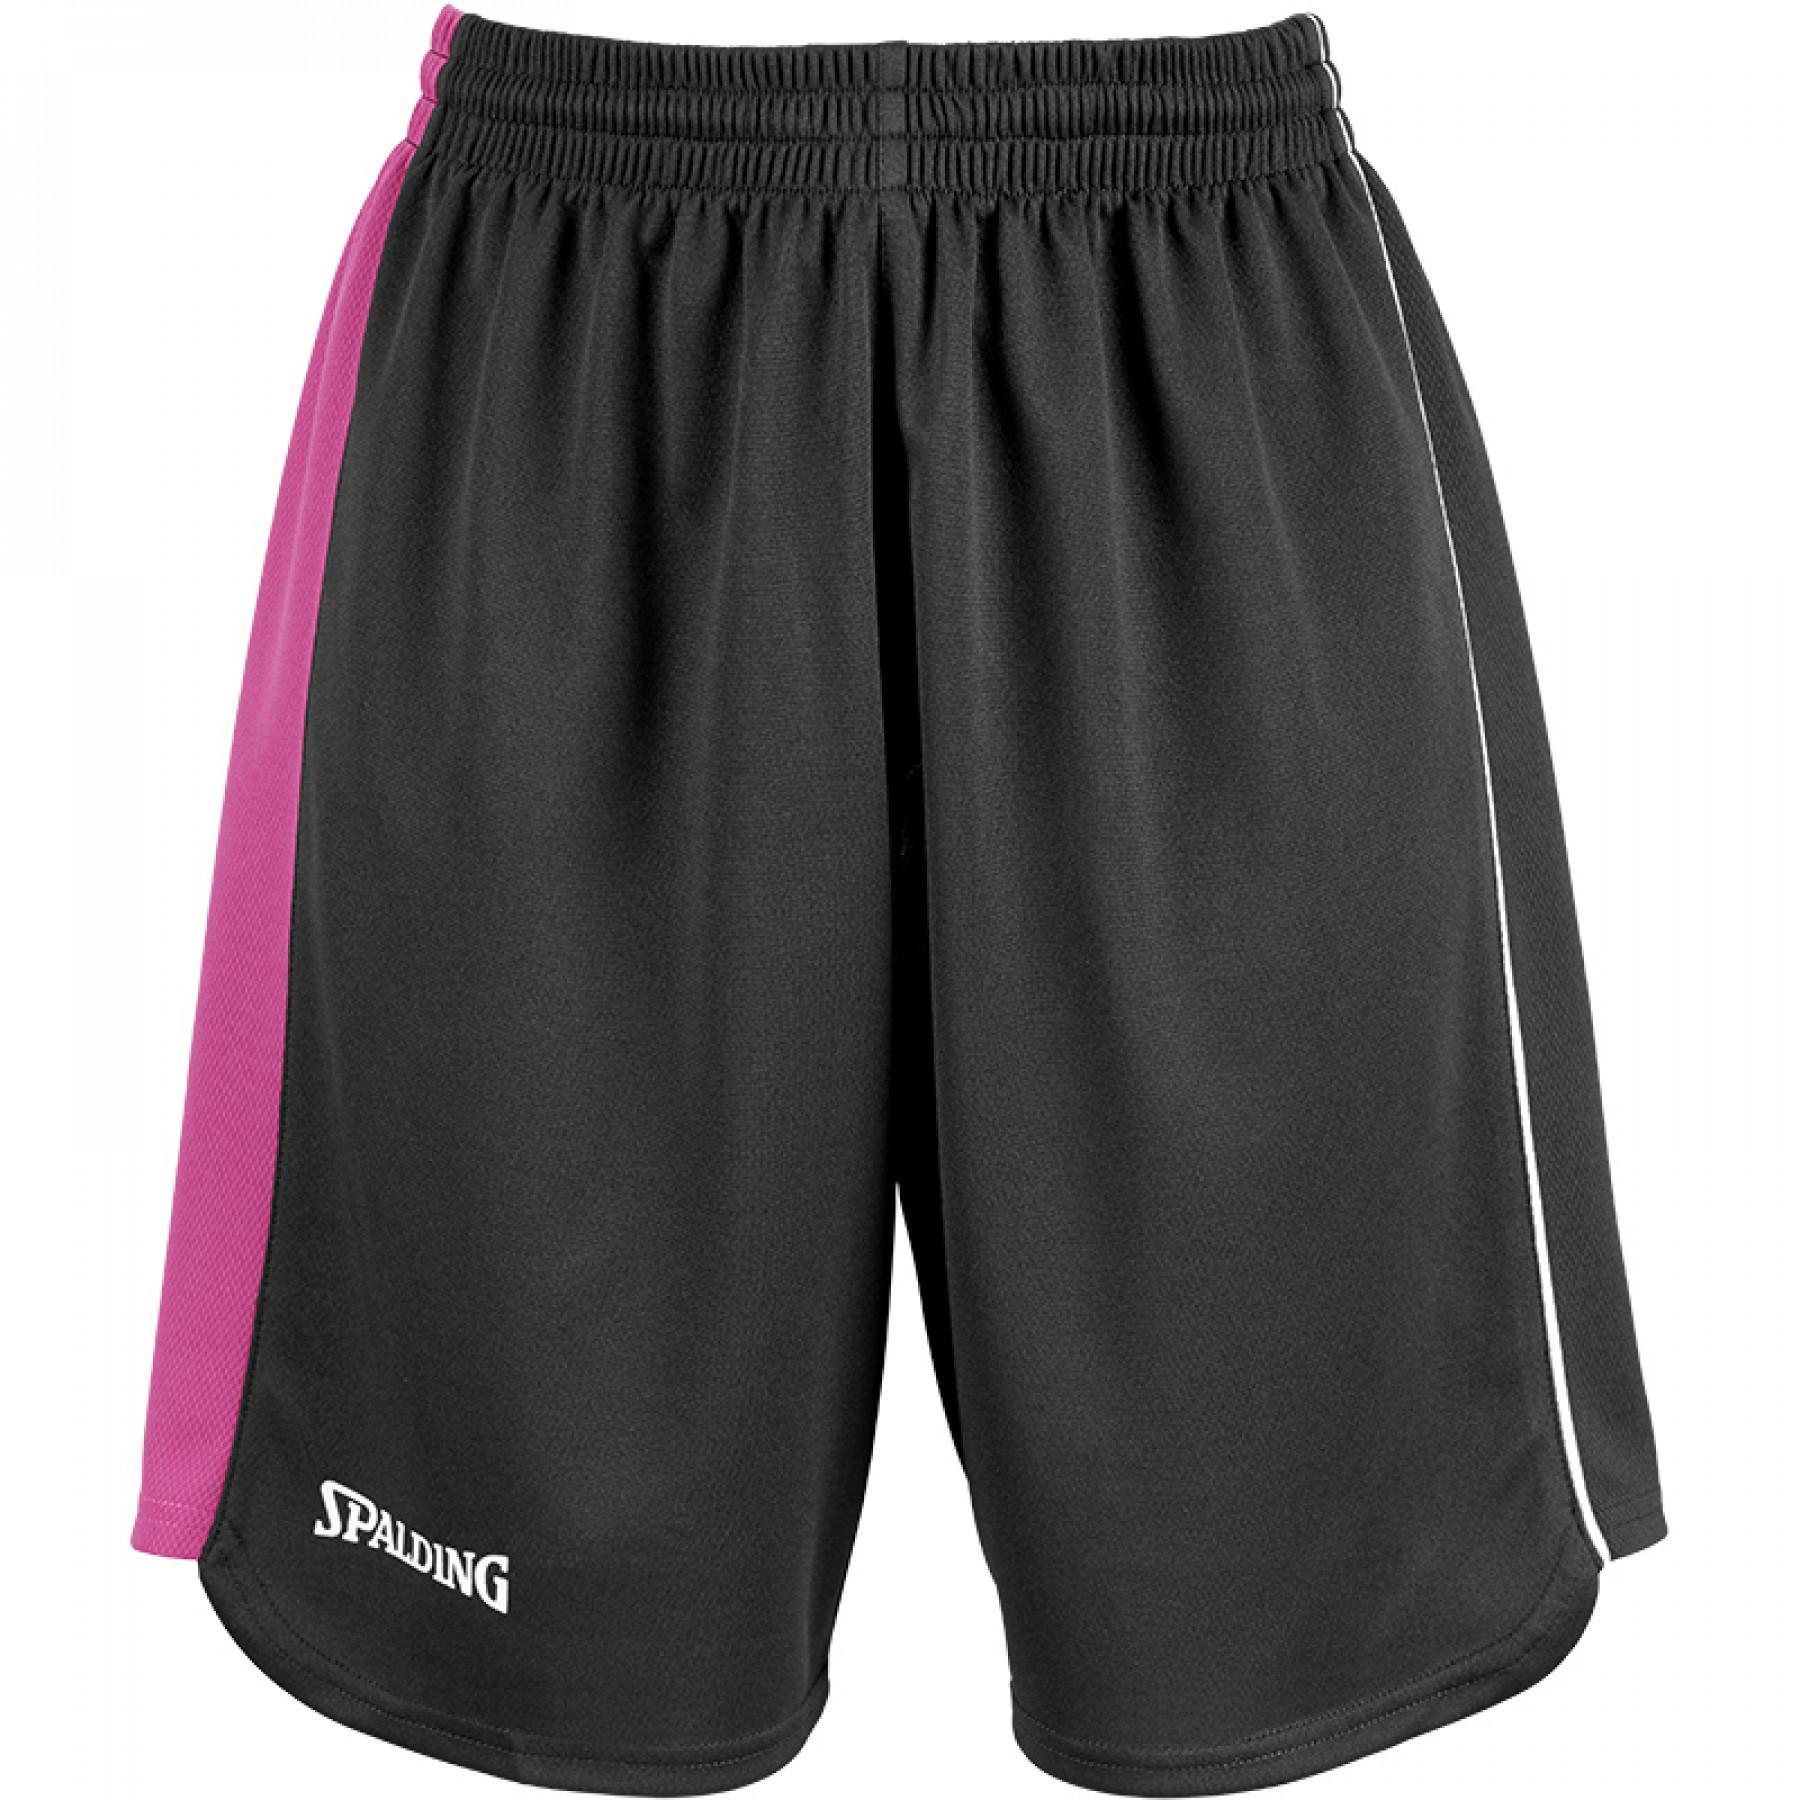 Spalding 4her Iii Shorts Trousers 